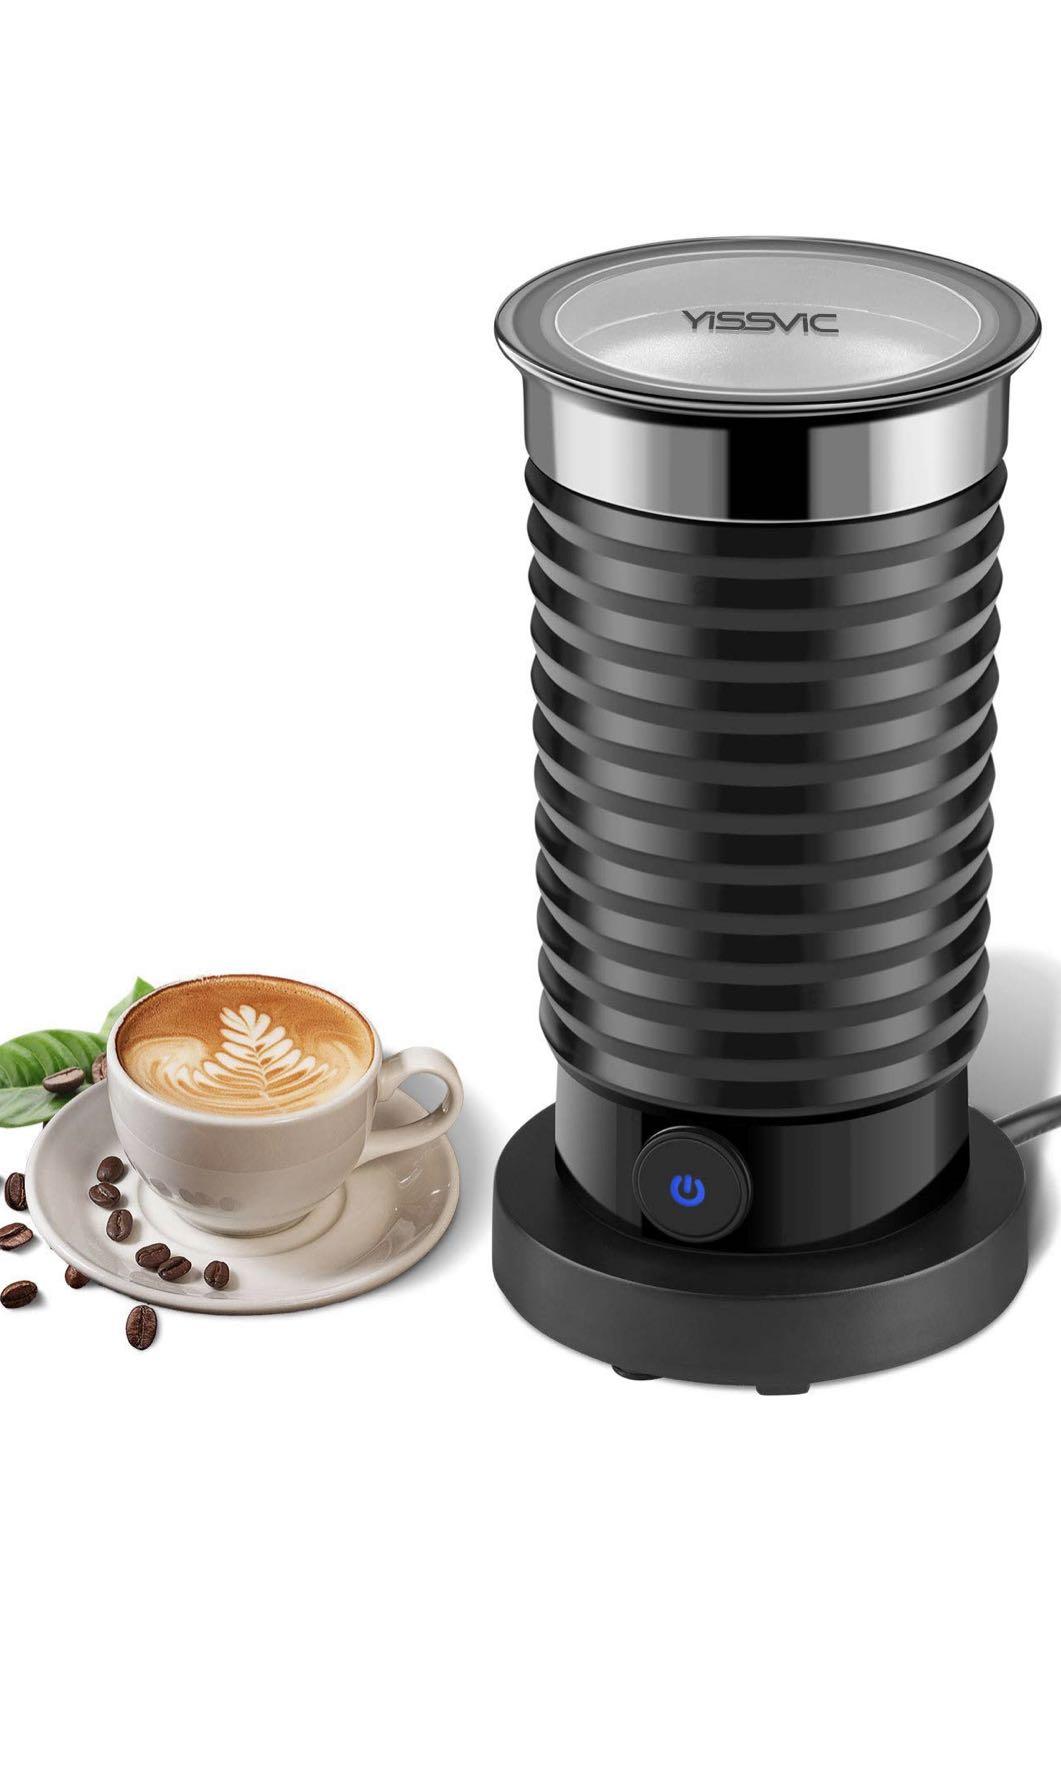 https://media.karousell.com/media/photos/products/2019/07/24/yissvic_milk_frother_electric_milk_steamer_and_warmer_with_two_whisks_auto_shut_off_for_cappuccino_l_1563978180_1d241437_progressive.jpg